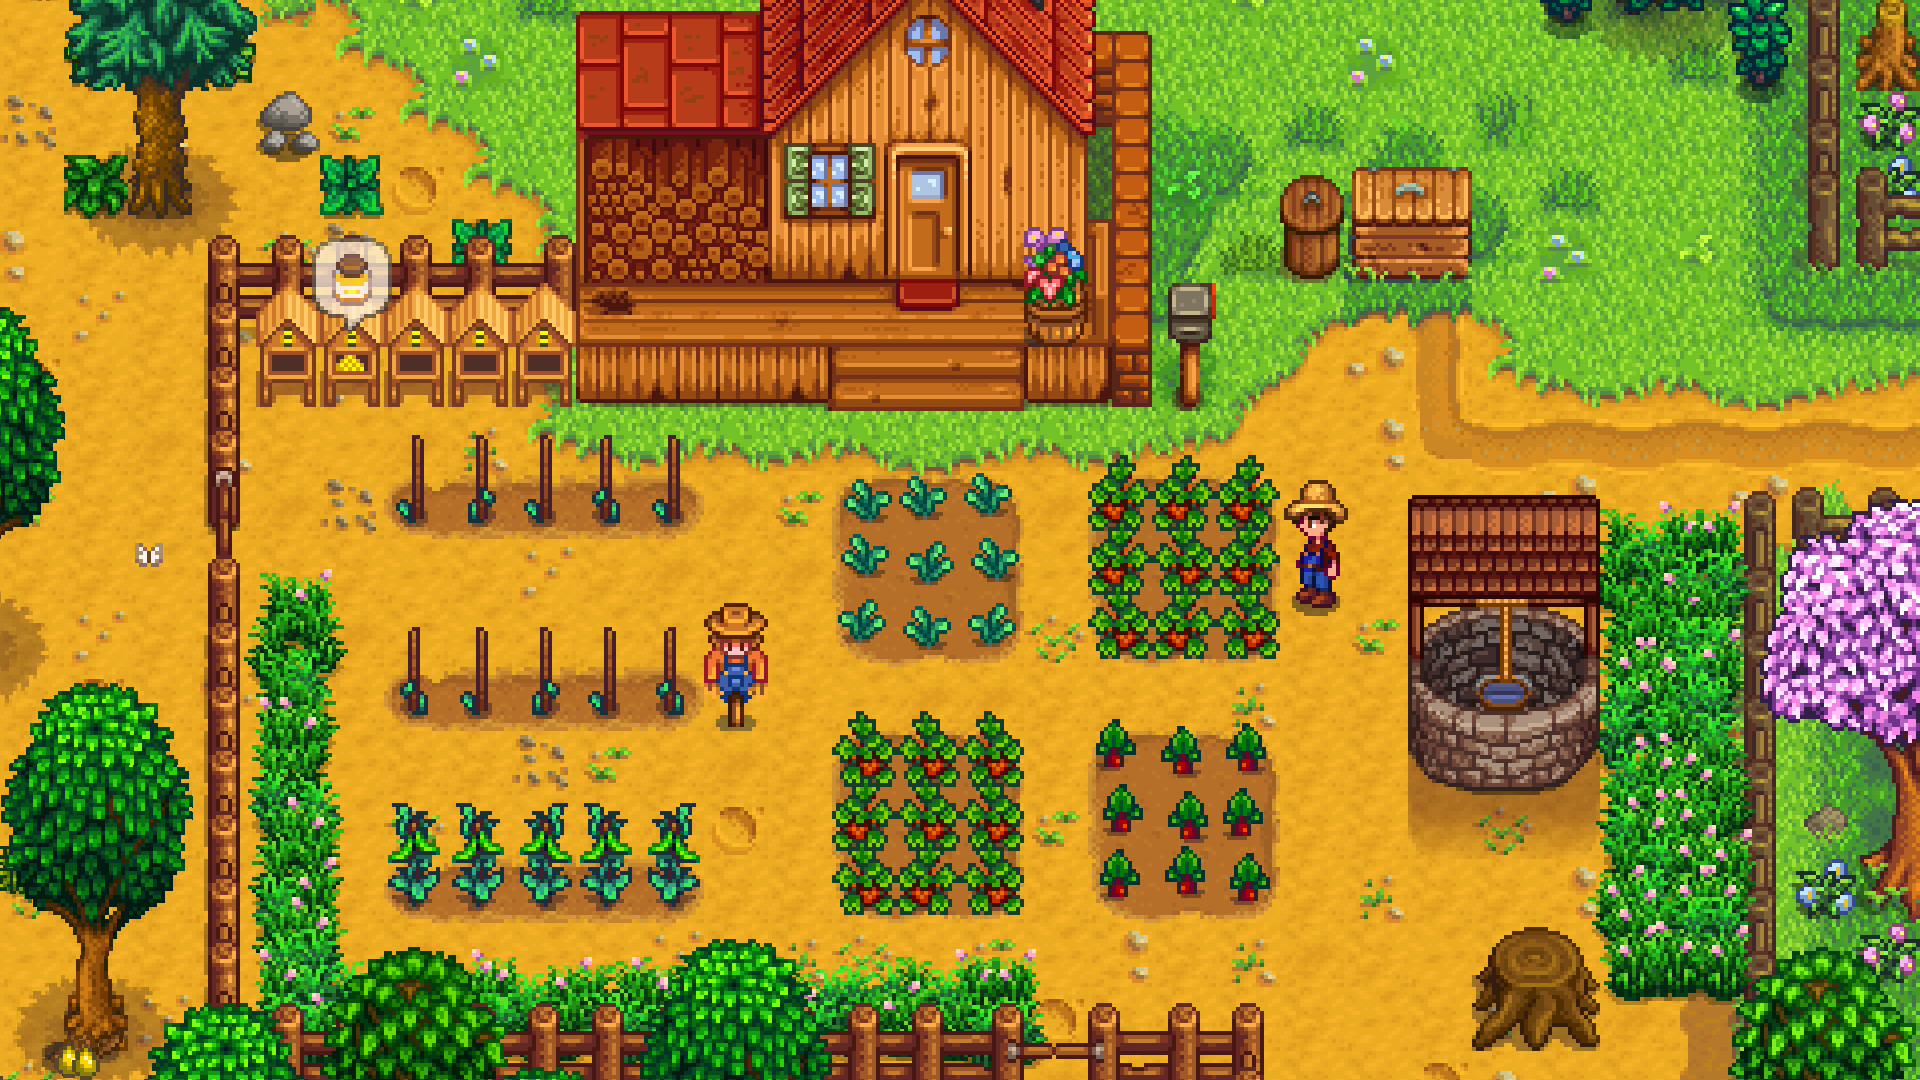 A screenshot from "Stardew Valley:" a player's farm